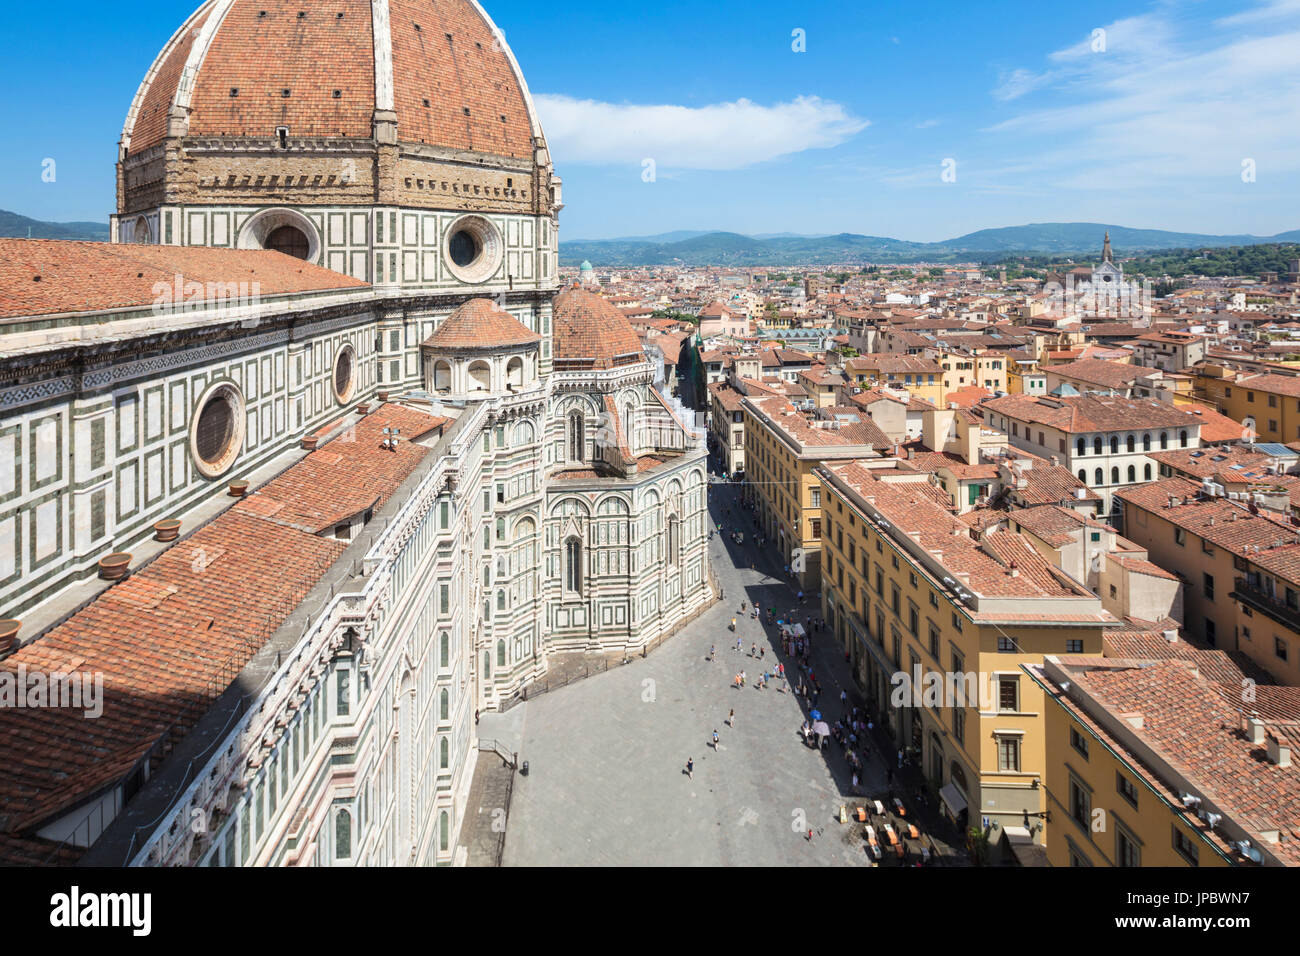 The ancient Duomo di Firenze built with polychrome marble panels and Brunelleschi's Dome Florence Tuscany Italy Europe Stock Photo